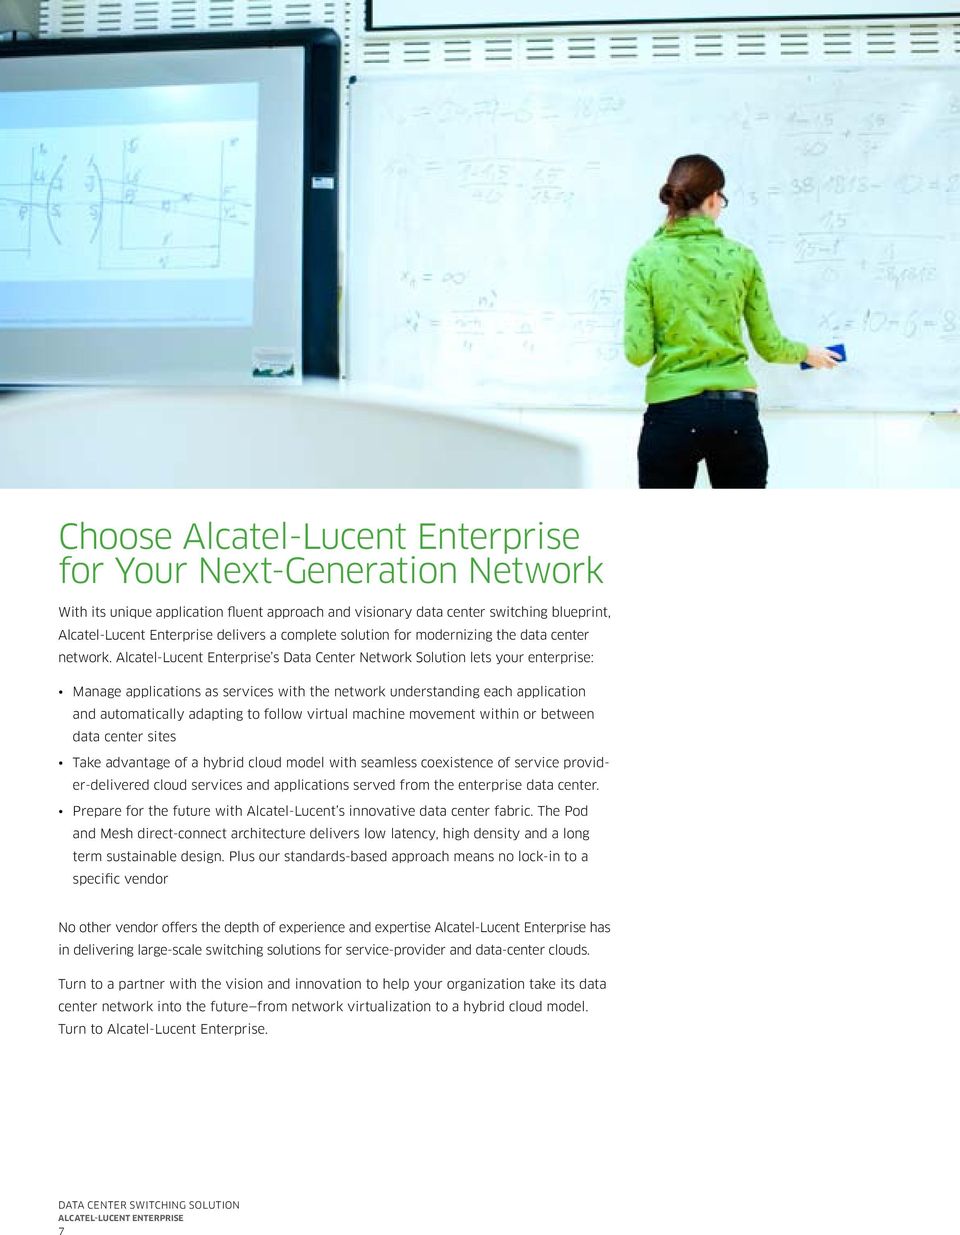 Alcatel-Lucent Enterprise s Data Center Network Solution lets your enterprise: Manage applications as services with the network understanding each application and automatically adapting to follow